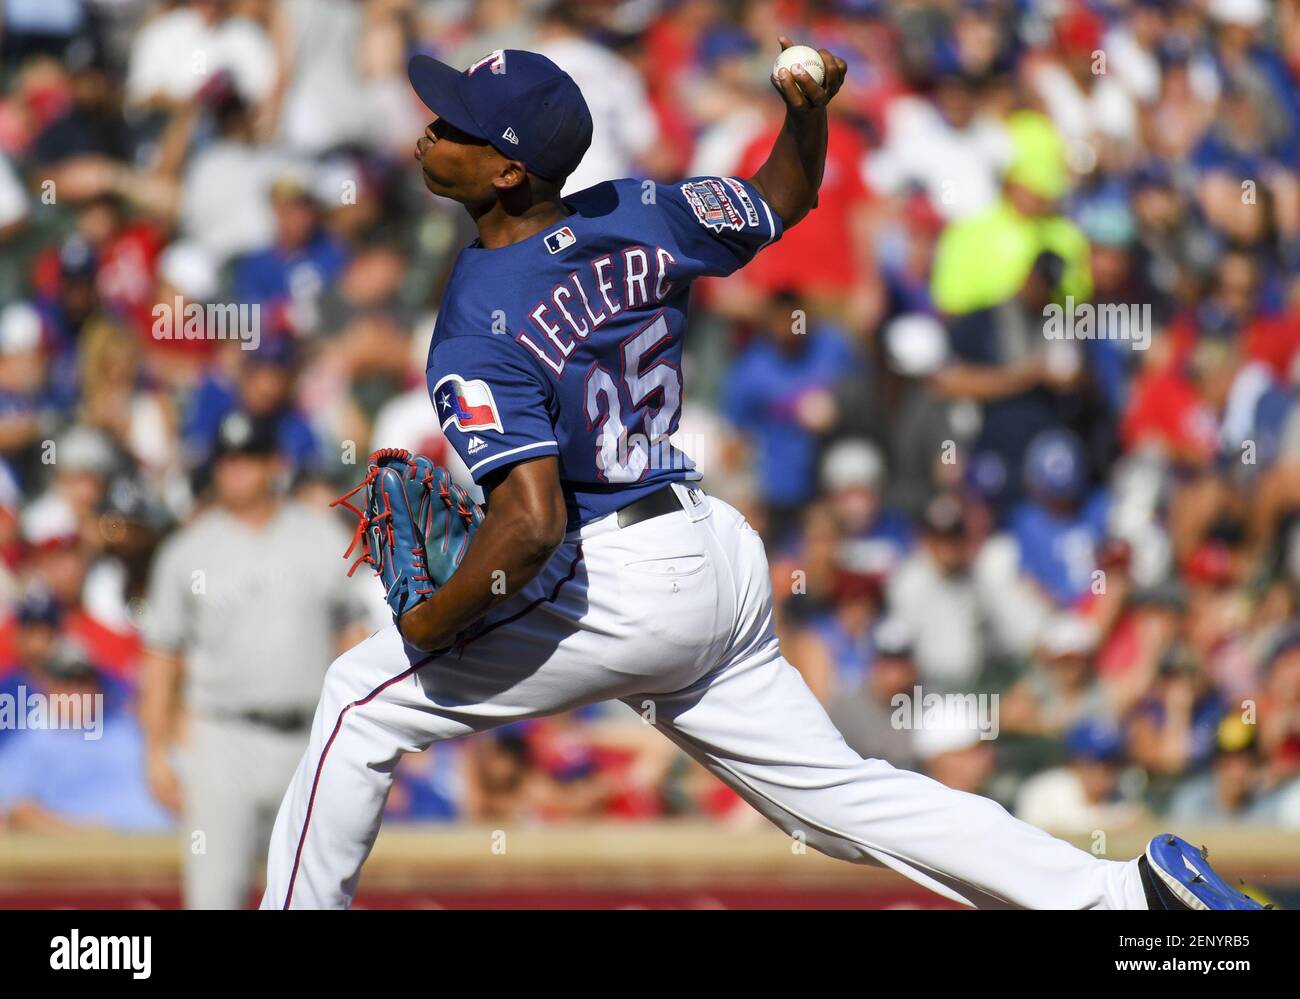 September 29, 2019: Texas Rangers relief pitcher Jose Leclerc #25 during  the final Major League Baseball game held at Globe Life Park between the  New York Yankees and the Texas Rangers in